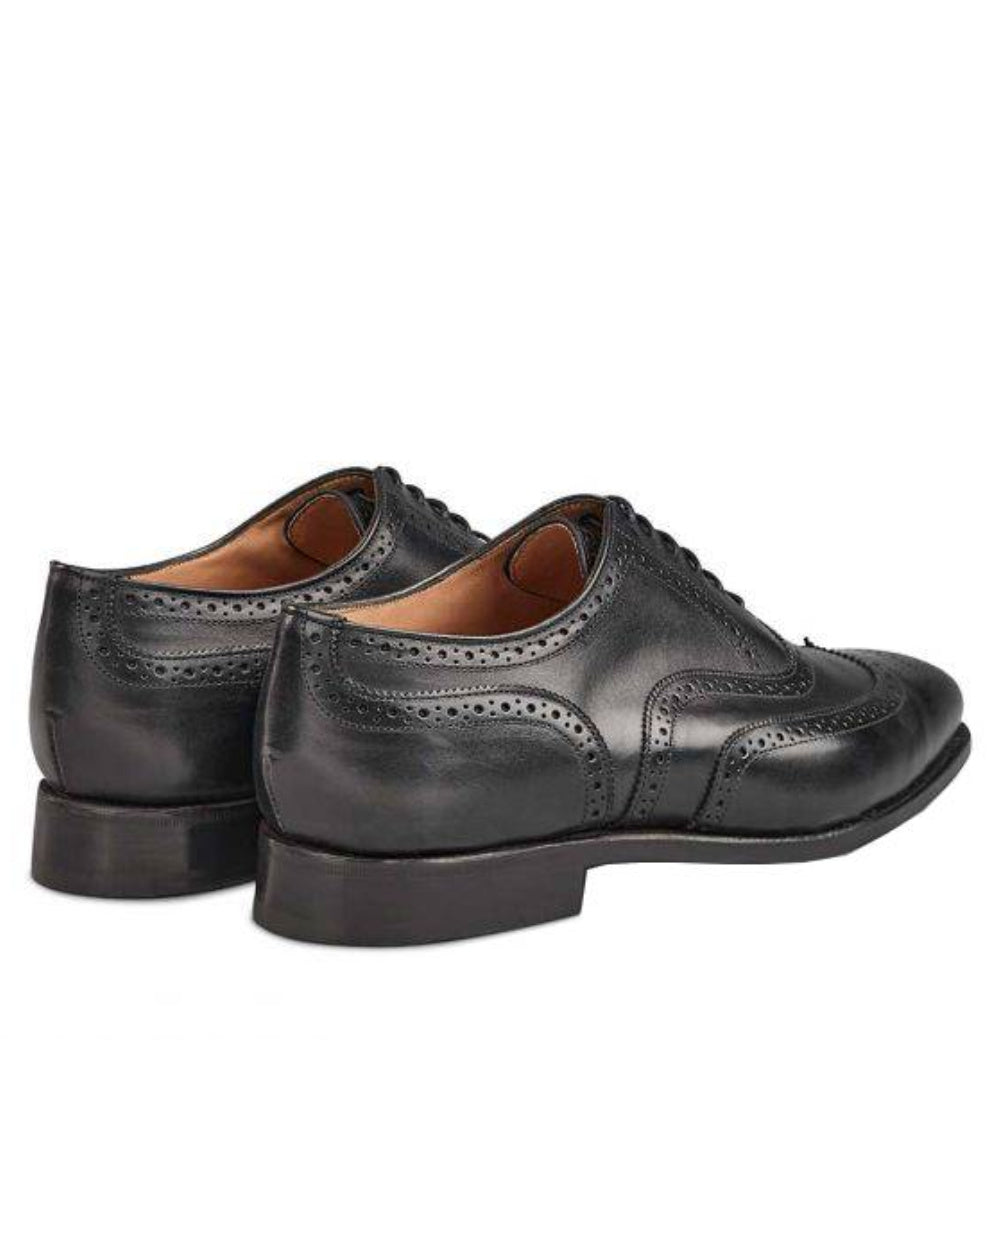 Black Coloured Trickers Picadilly Leather Sole Brogue Oxford City Shoe On A White Background 